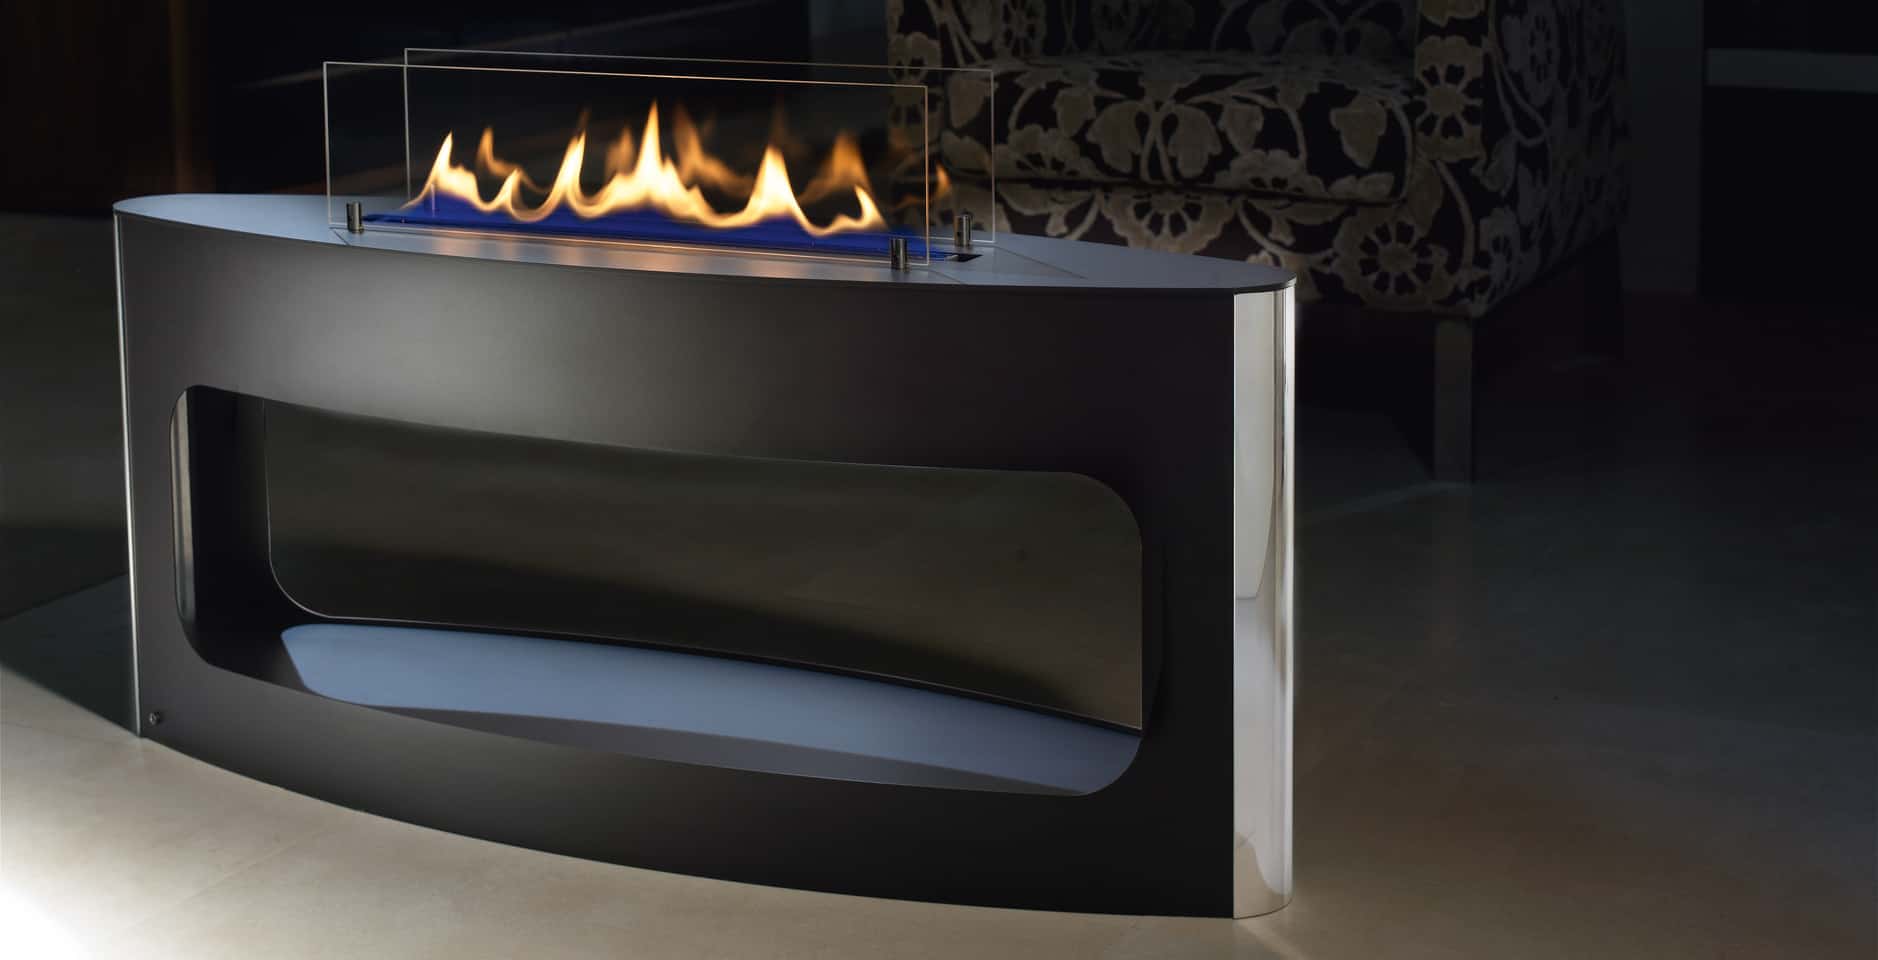 10 15 sculpturally exciting bio ethanol fireplace designs